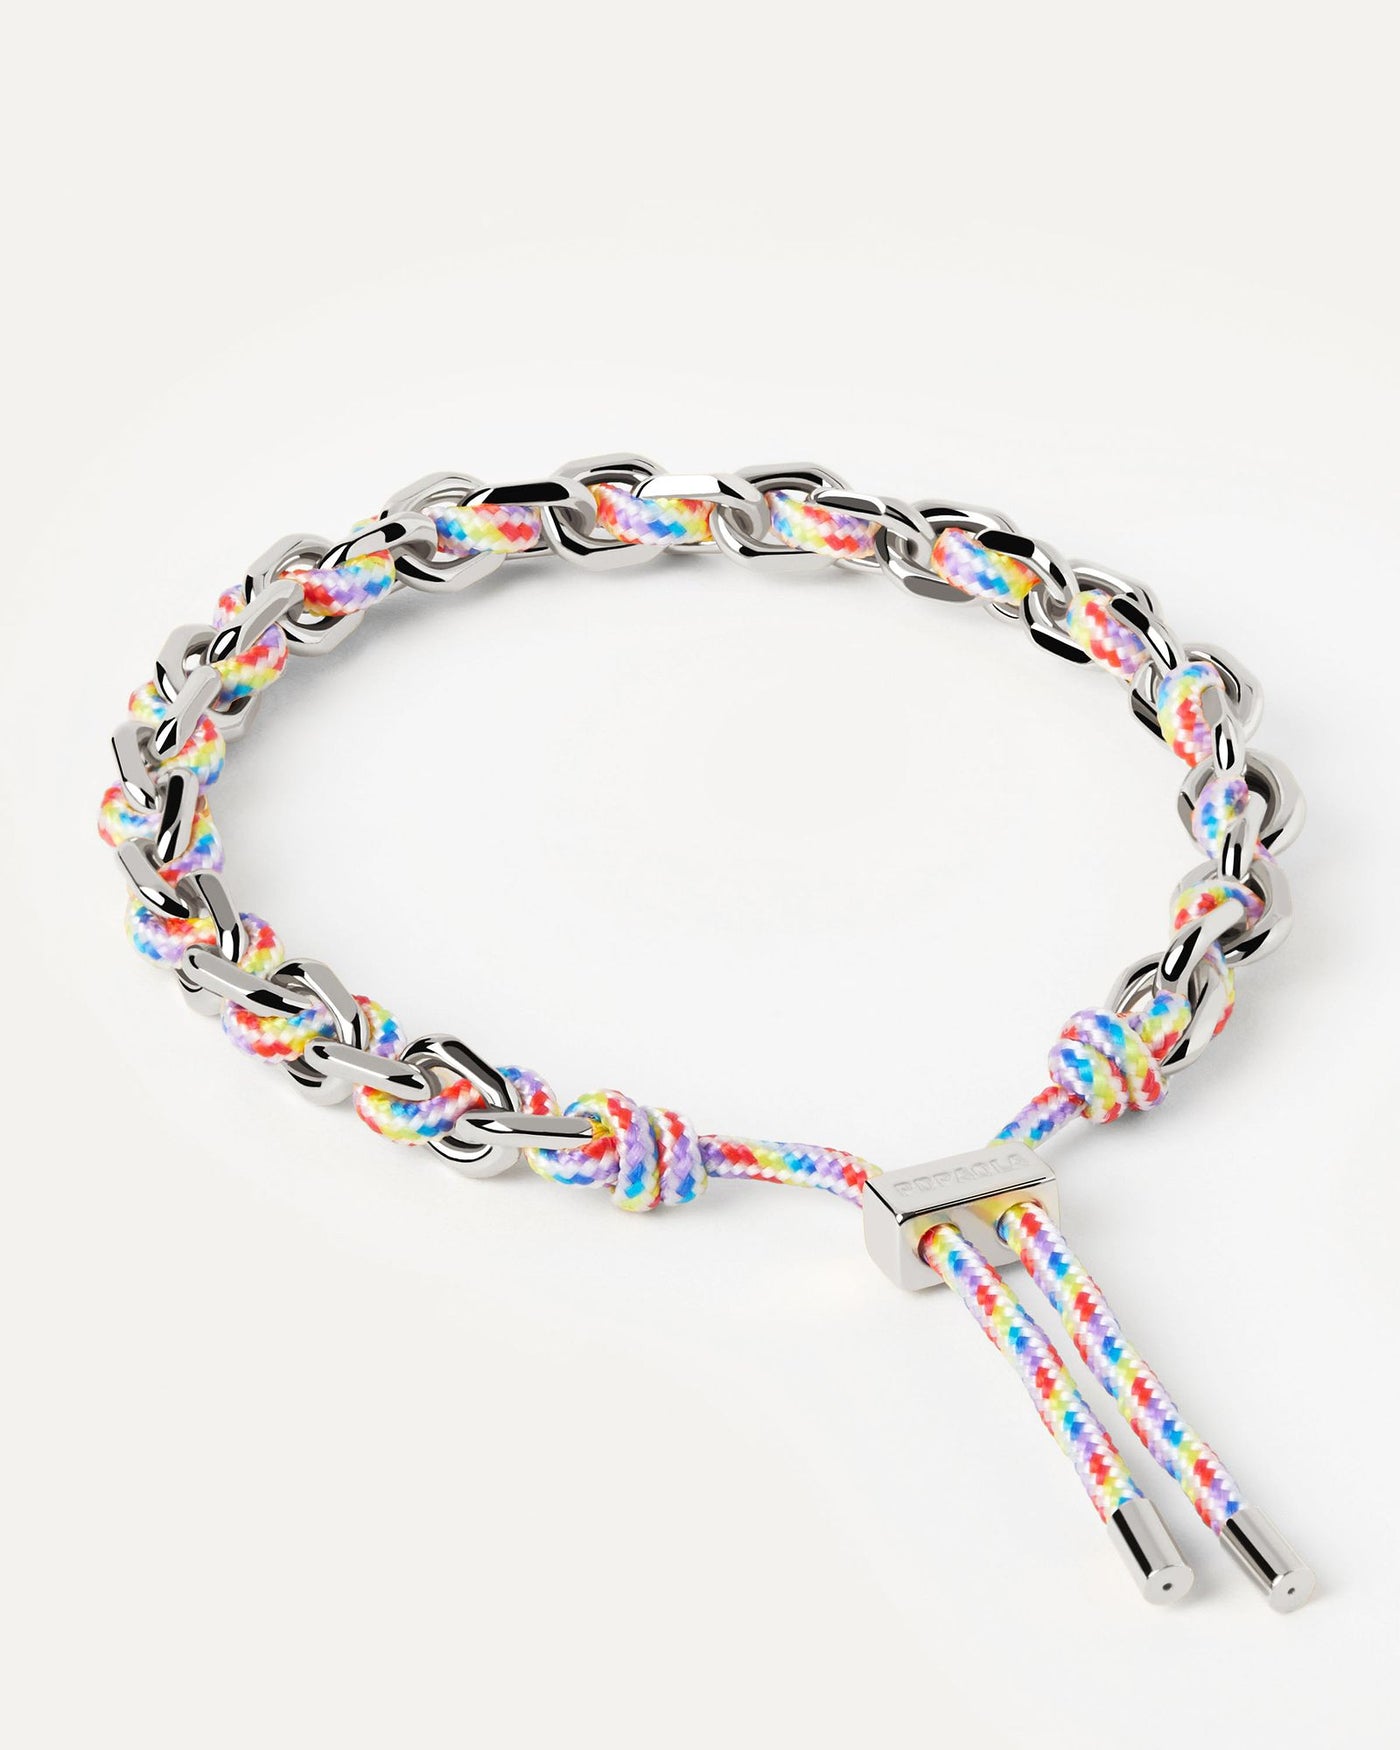 2024 Selection | Prisma Rope and Chain Silver Bracelet. Silver chain bracelet with a multicolor rope adjustable sliding clasp. Get the latest arrival from PDPAOLA. Place your order safely and get this Best Seller. Free Shipping.